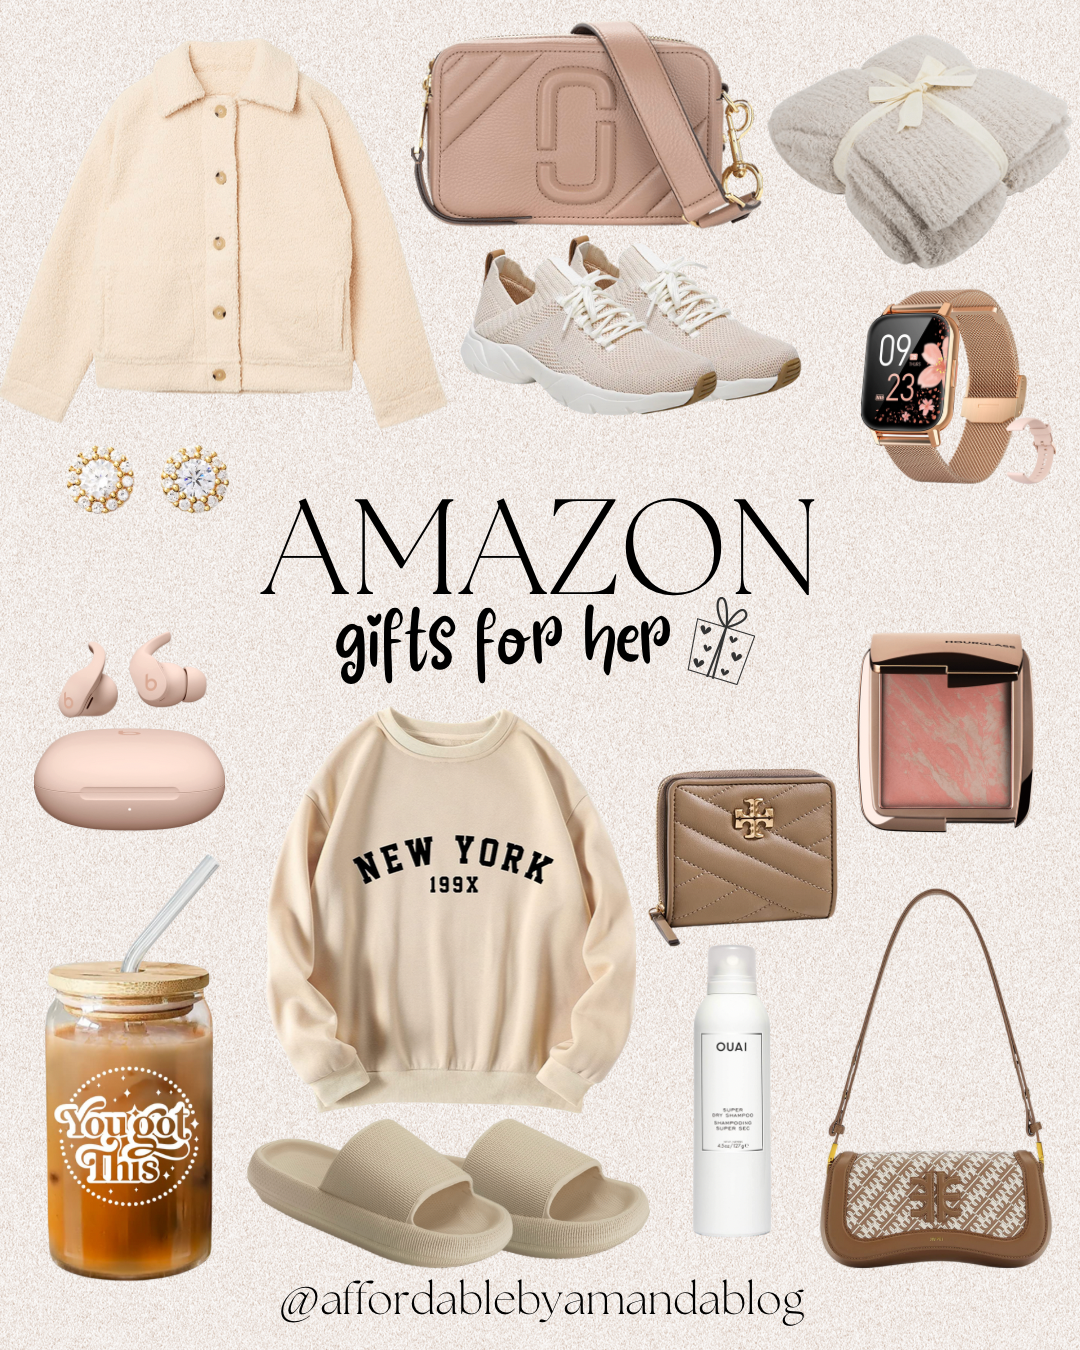 Amazon 'Gift Ideas for Her' Holiday Gift Guide — The Side Hustle Bustle